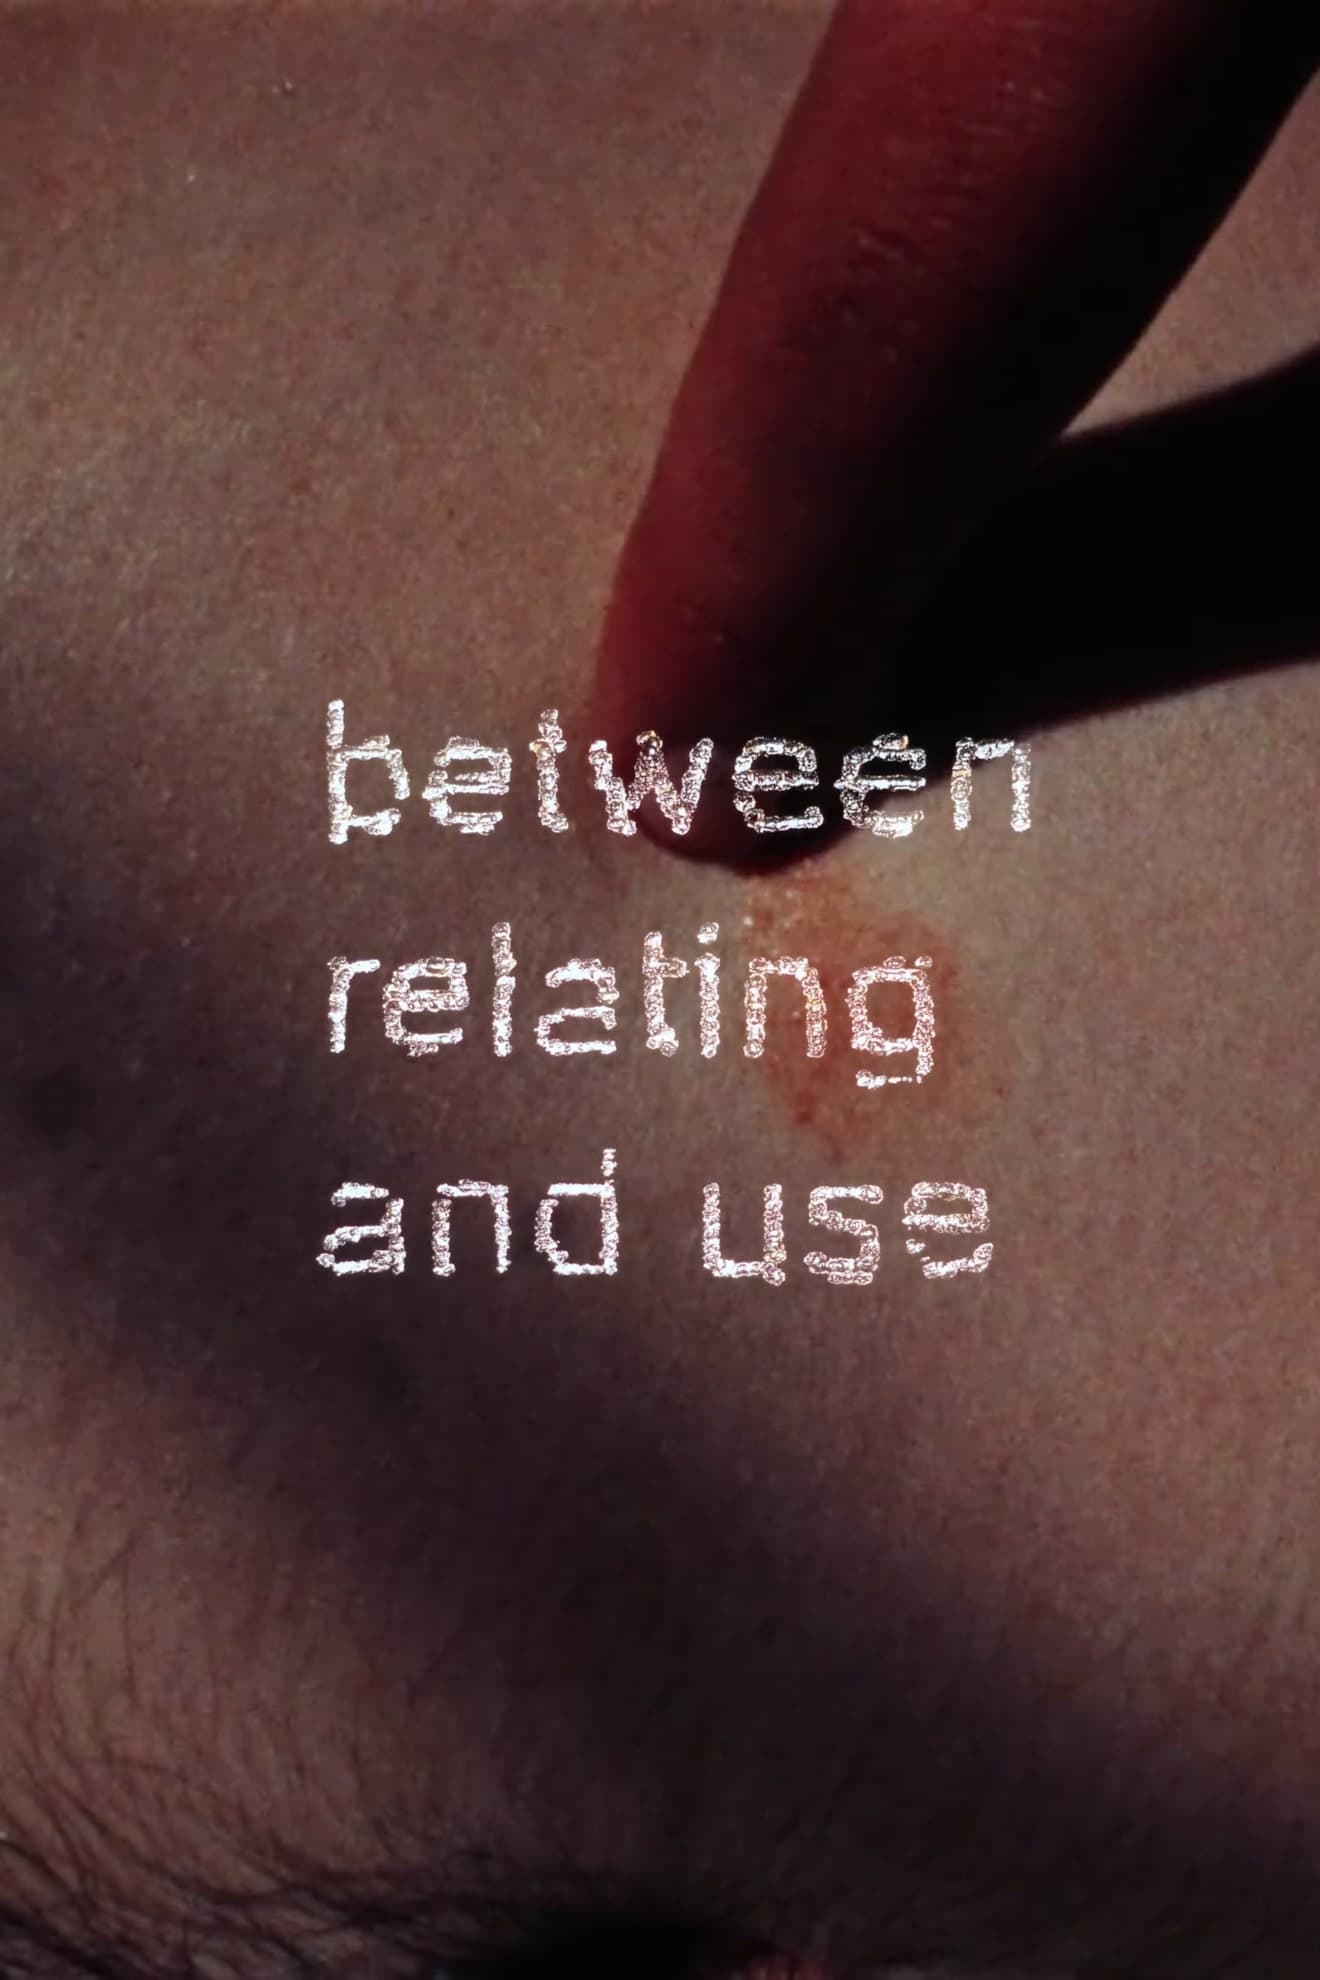 Between Relating and Use